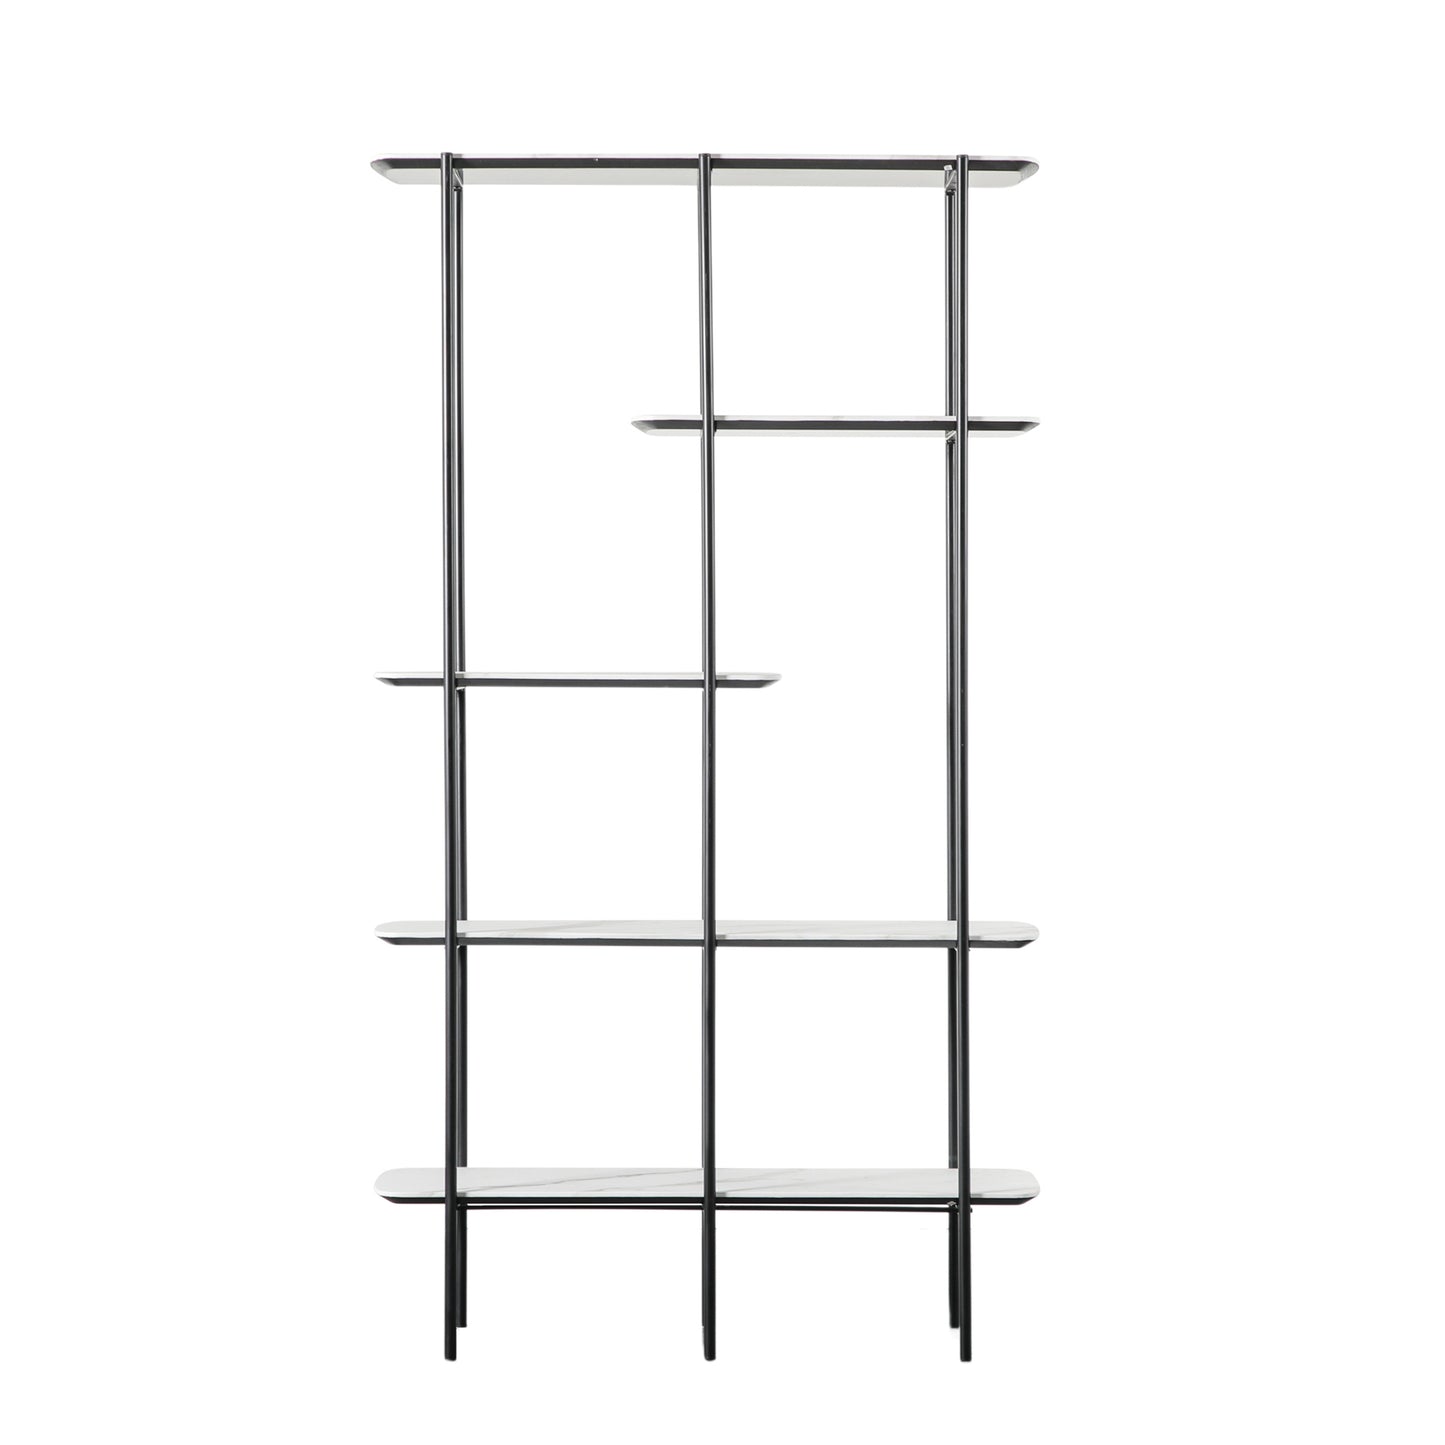 A Ludworth Open DisplayUnit WhitBristle 900x330x1600mm bookcase with glass shelves for interior decor from Kikiathome.co.uk.